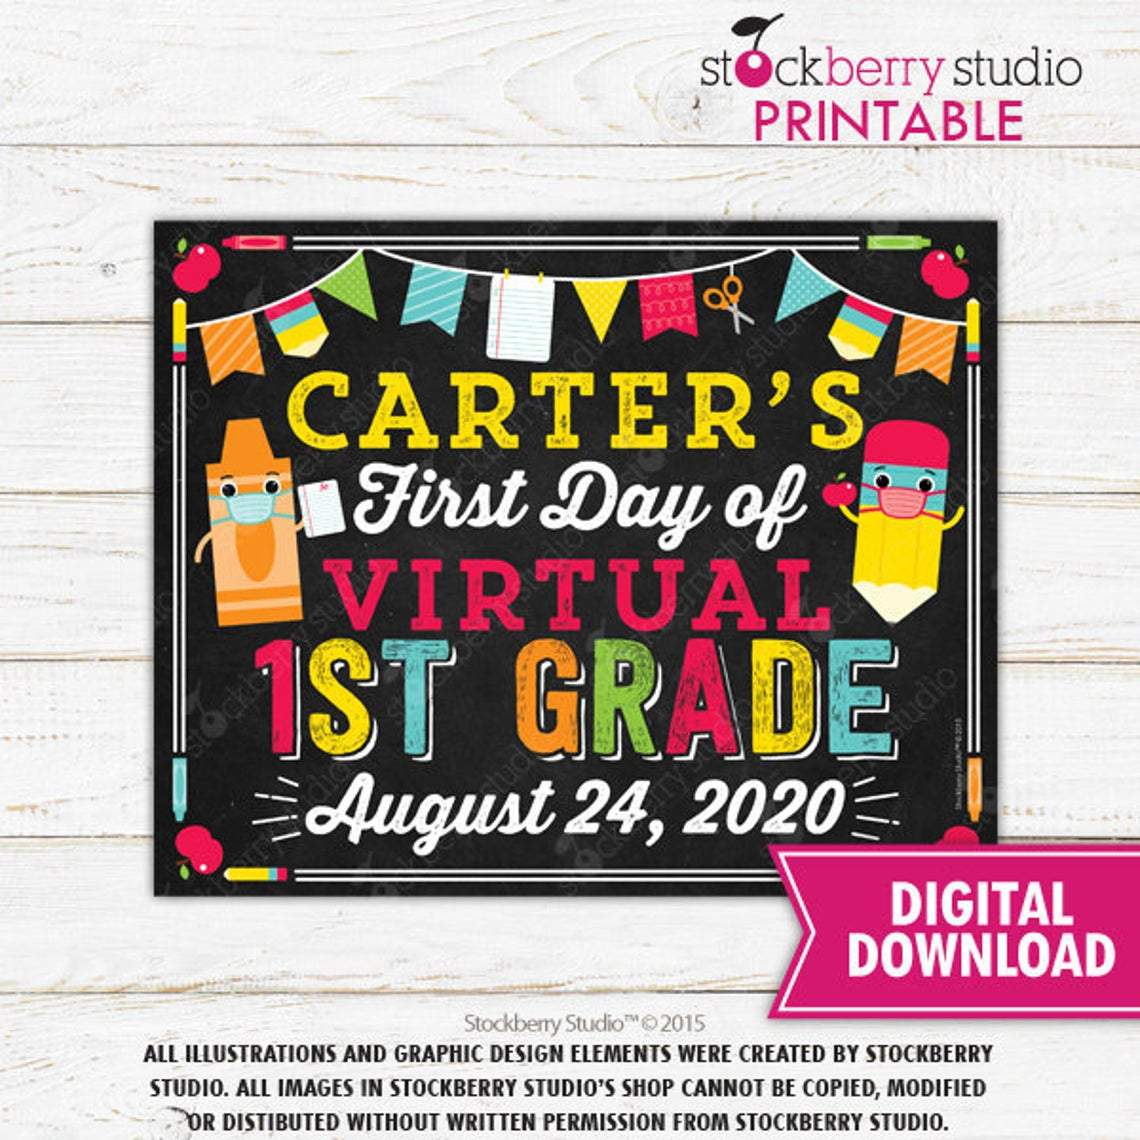 First Day of Virtual School Printable Sign E-learning - Stockberry Studio